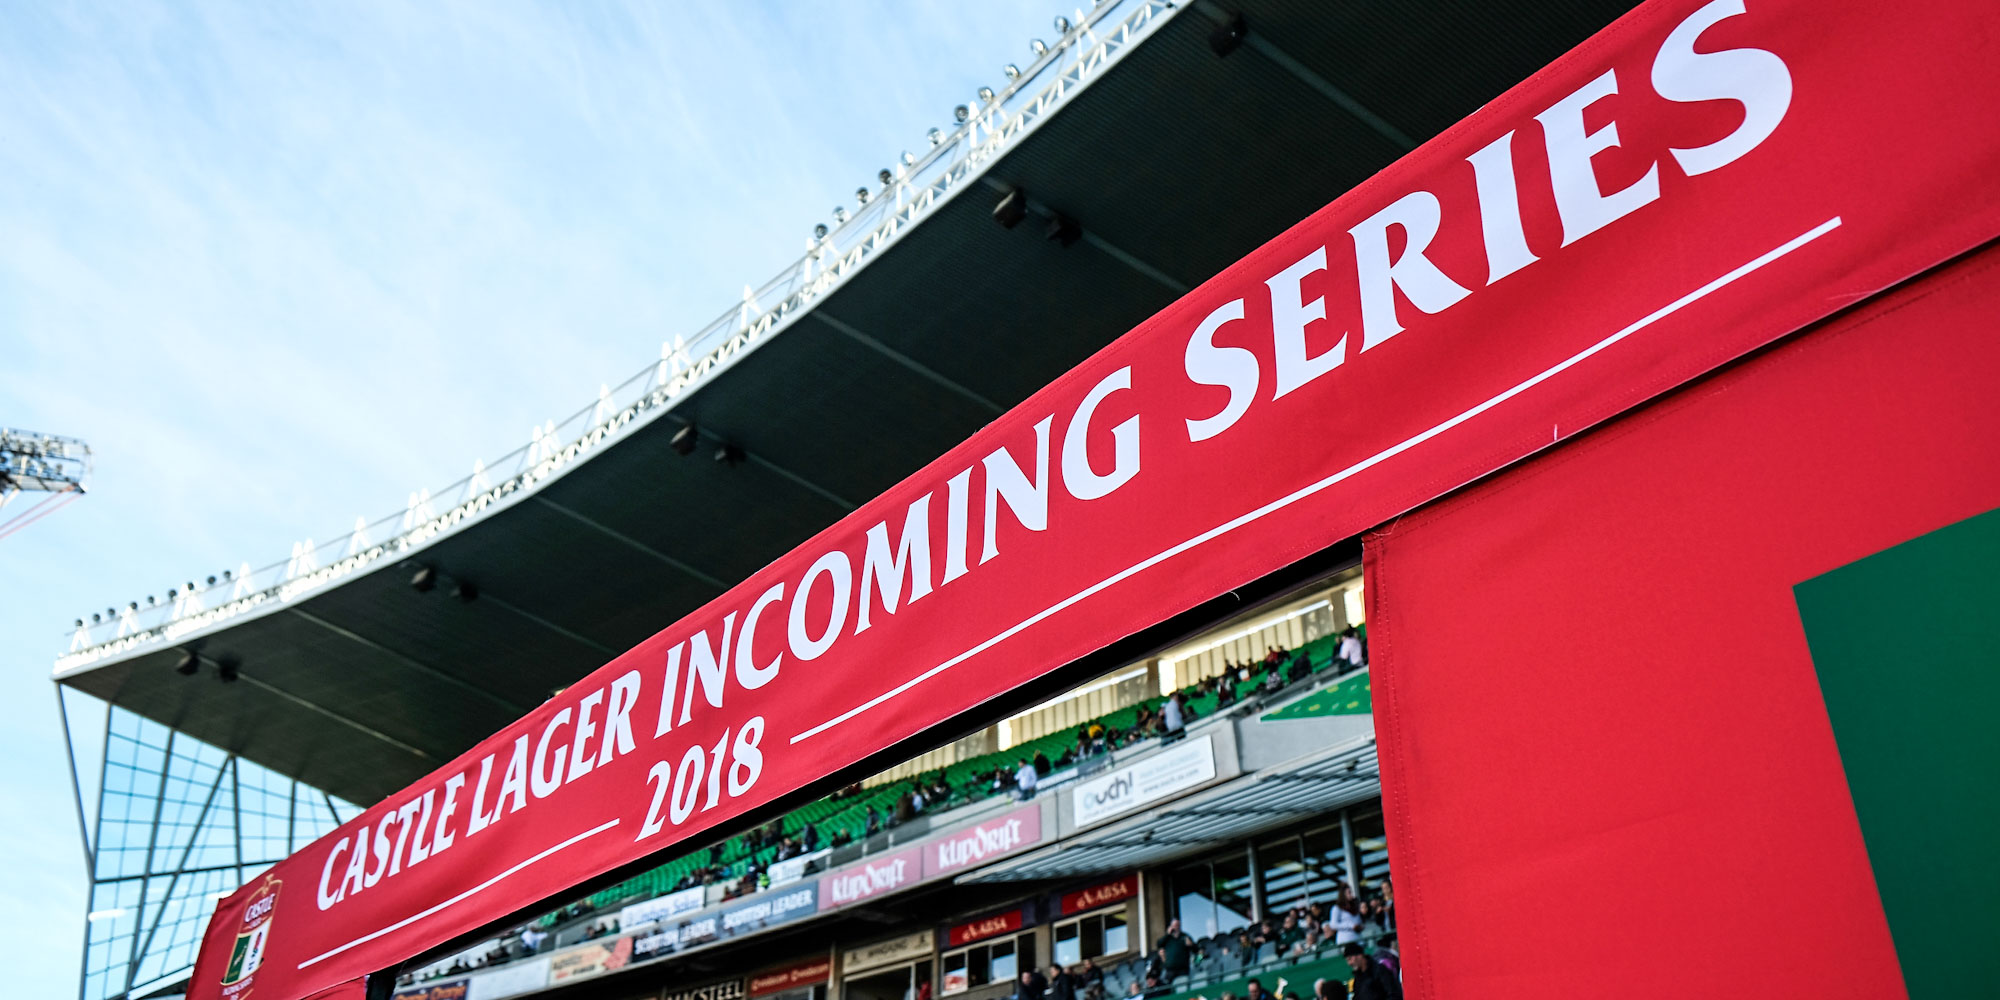 The three Tests against Wales will be the first Castle Lager Incoming Series since 2018, with the Boks returning to Bloemfontein.